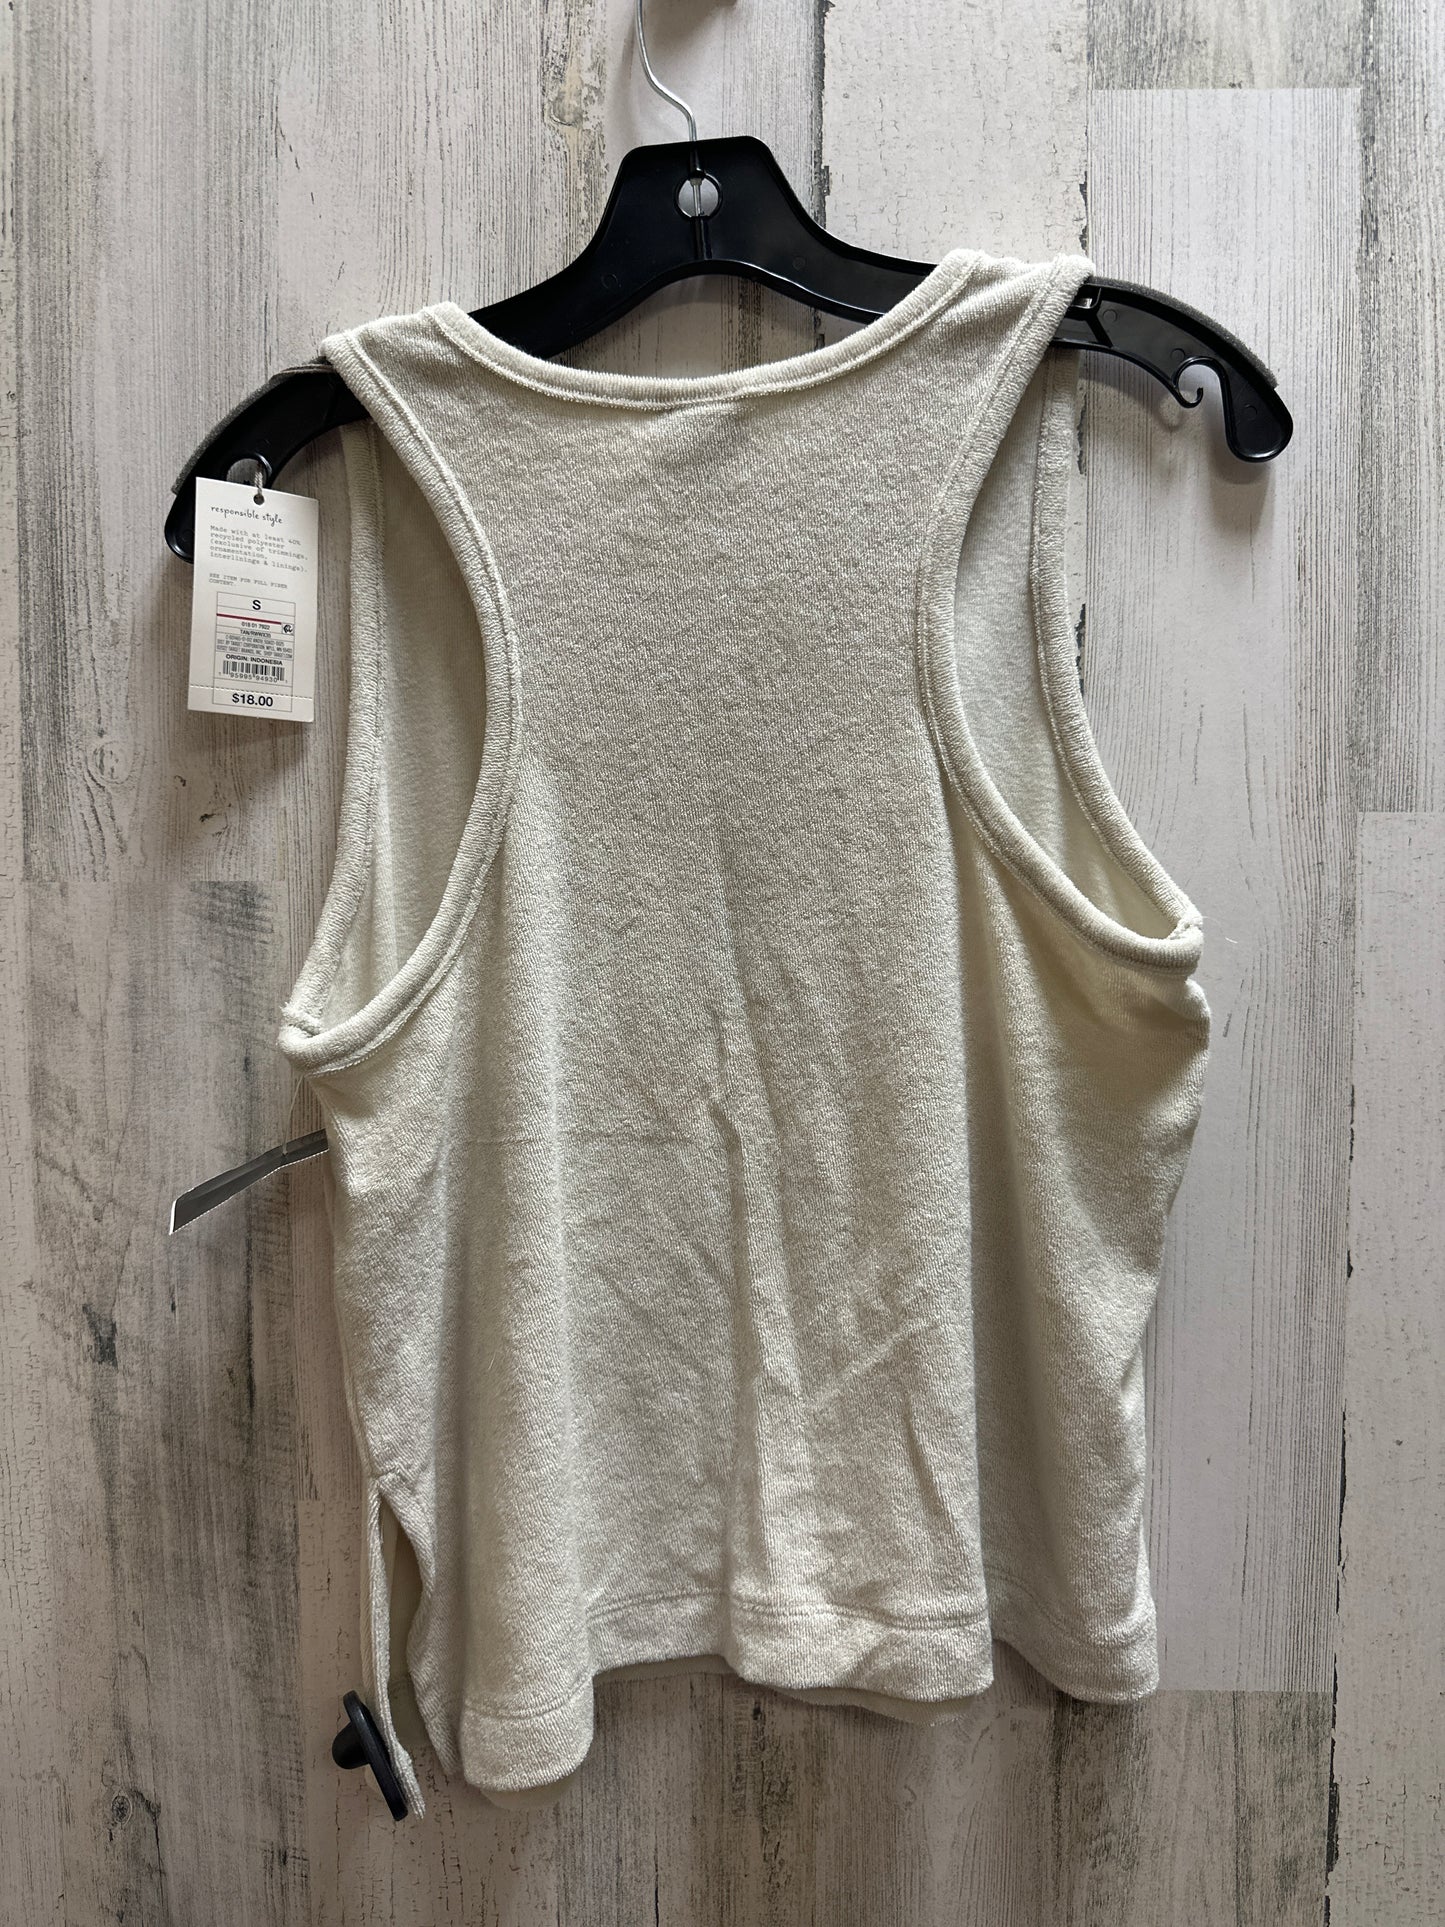 Tan Top Sleeveless A New Day, Size S